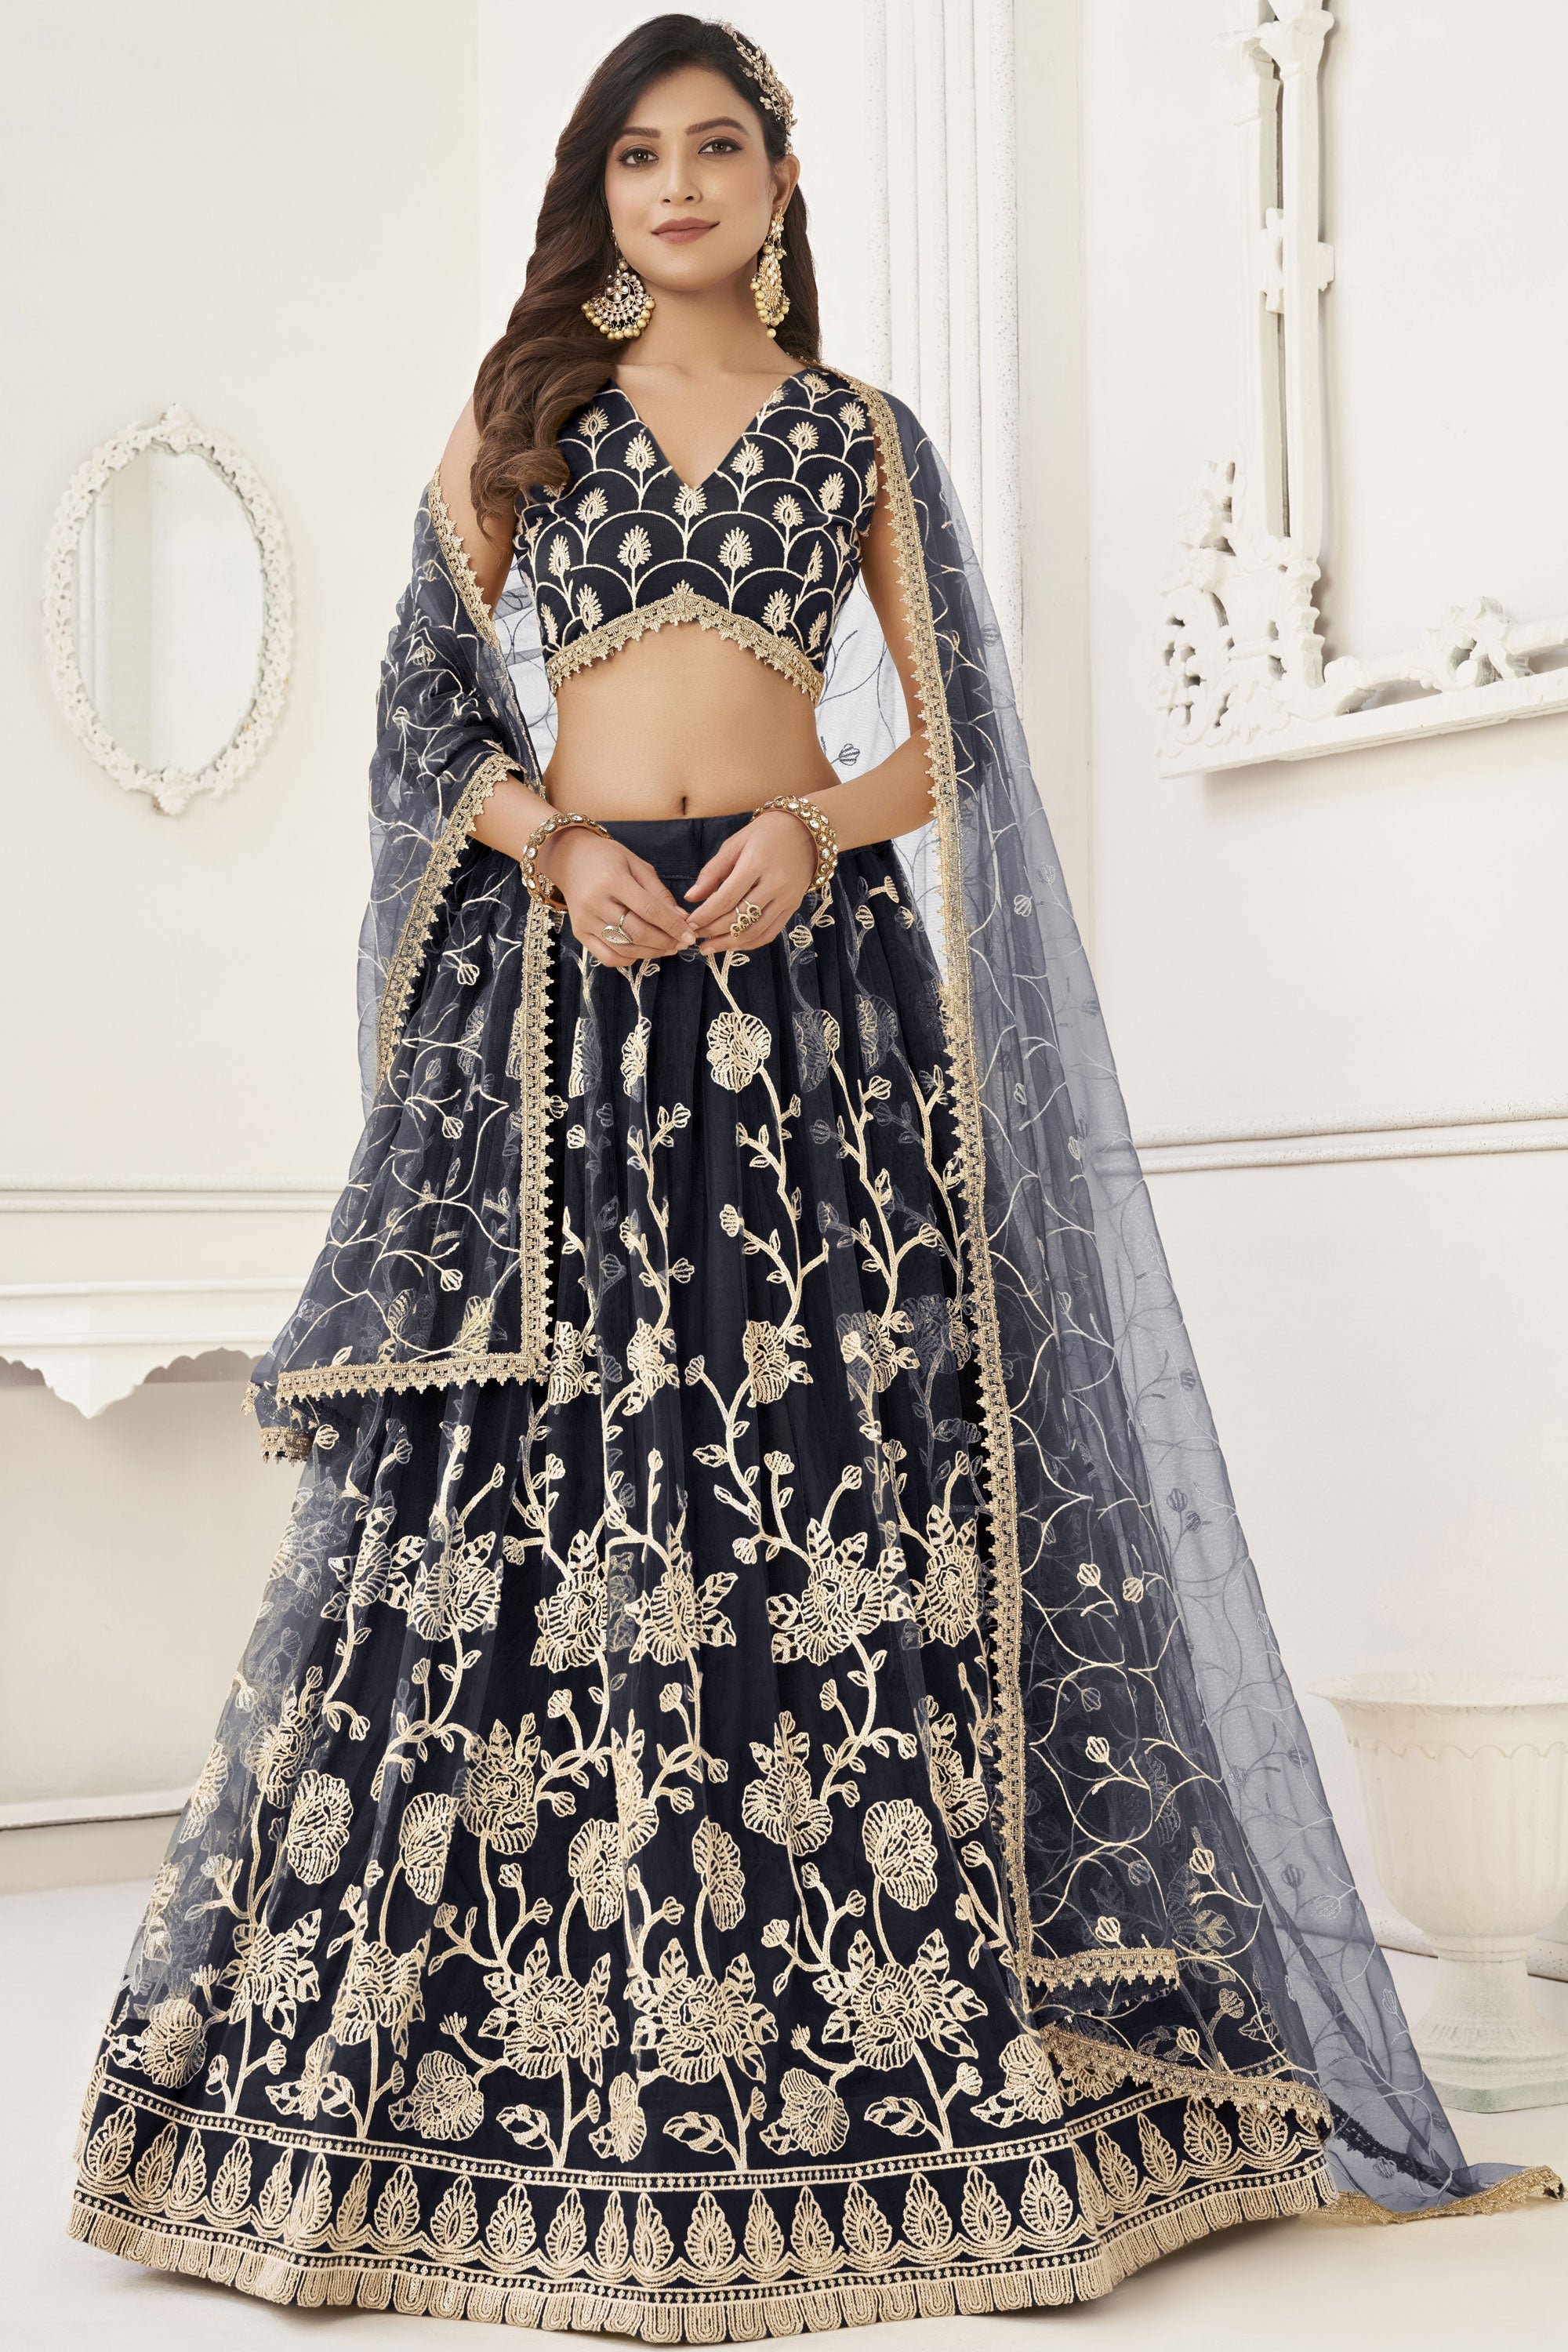 Nityanta Fab Black & Silver-Toned Printed Semi-Stitched Lehenga & Blouse  With Dupatta Price in India, Full Specifications & Offers | DTashion.com